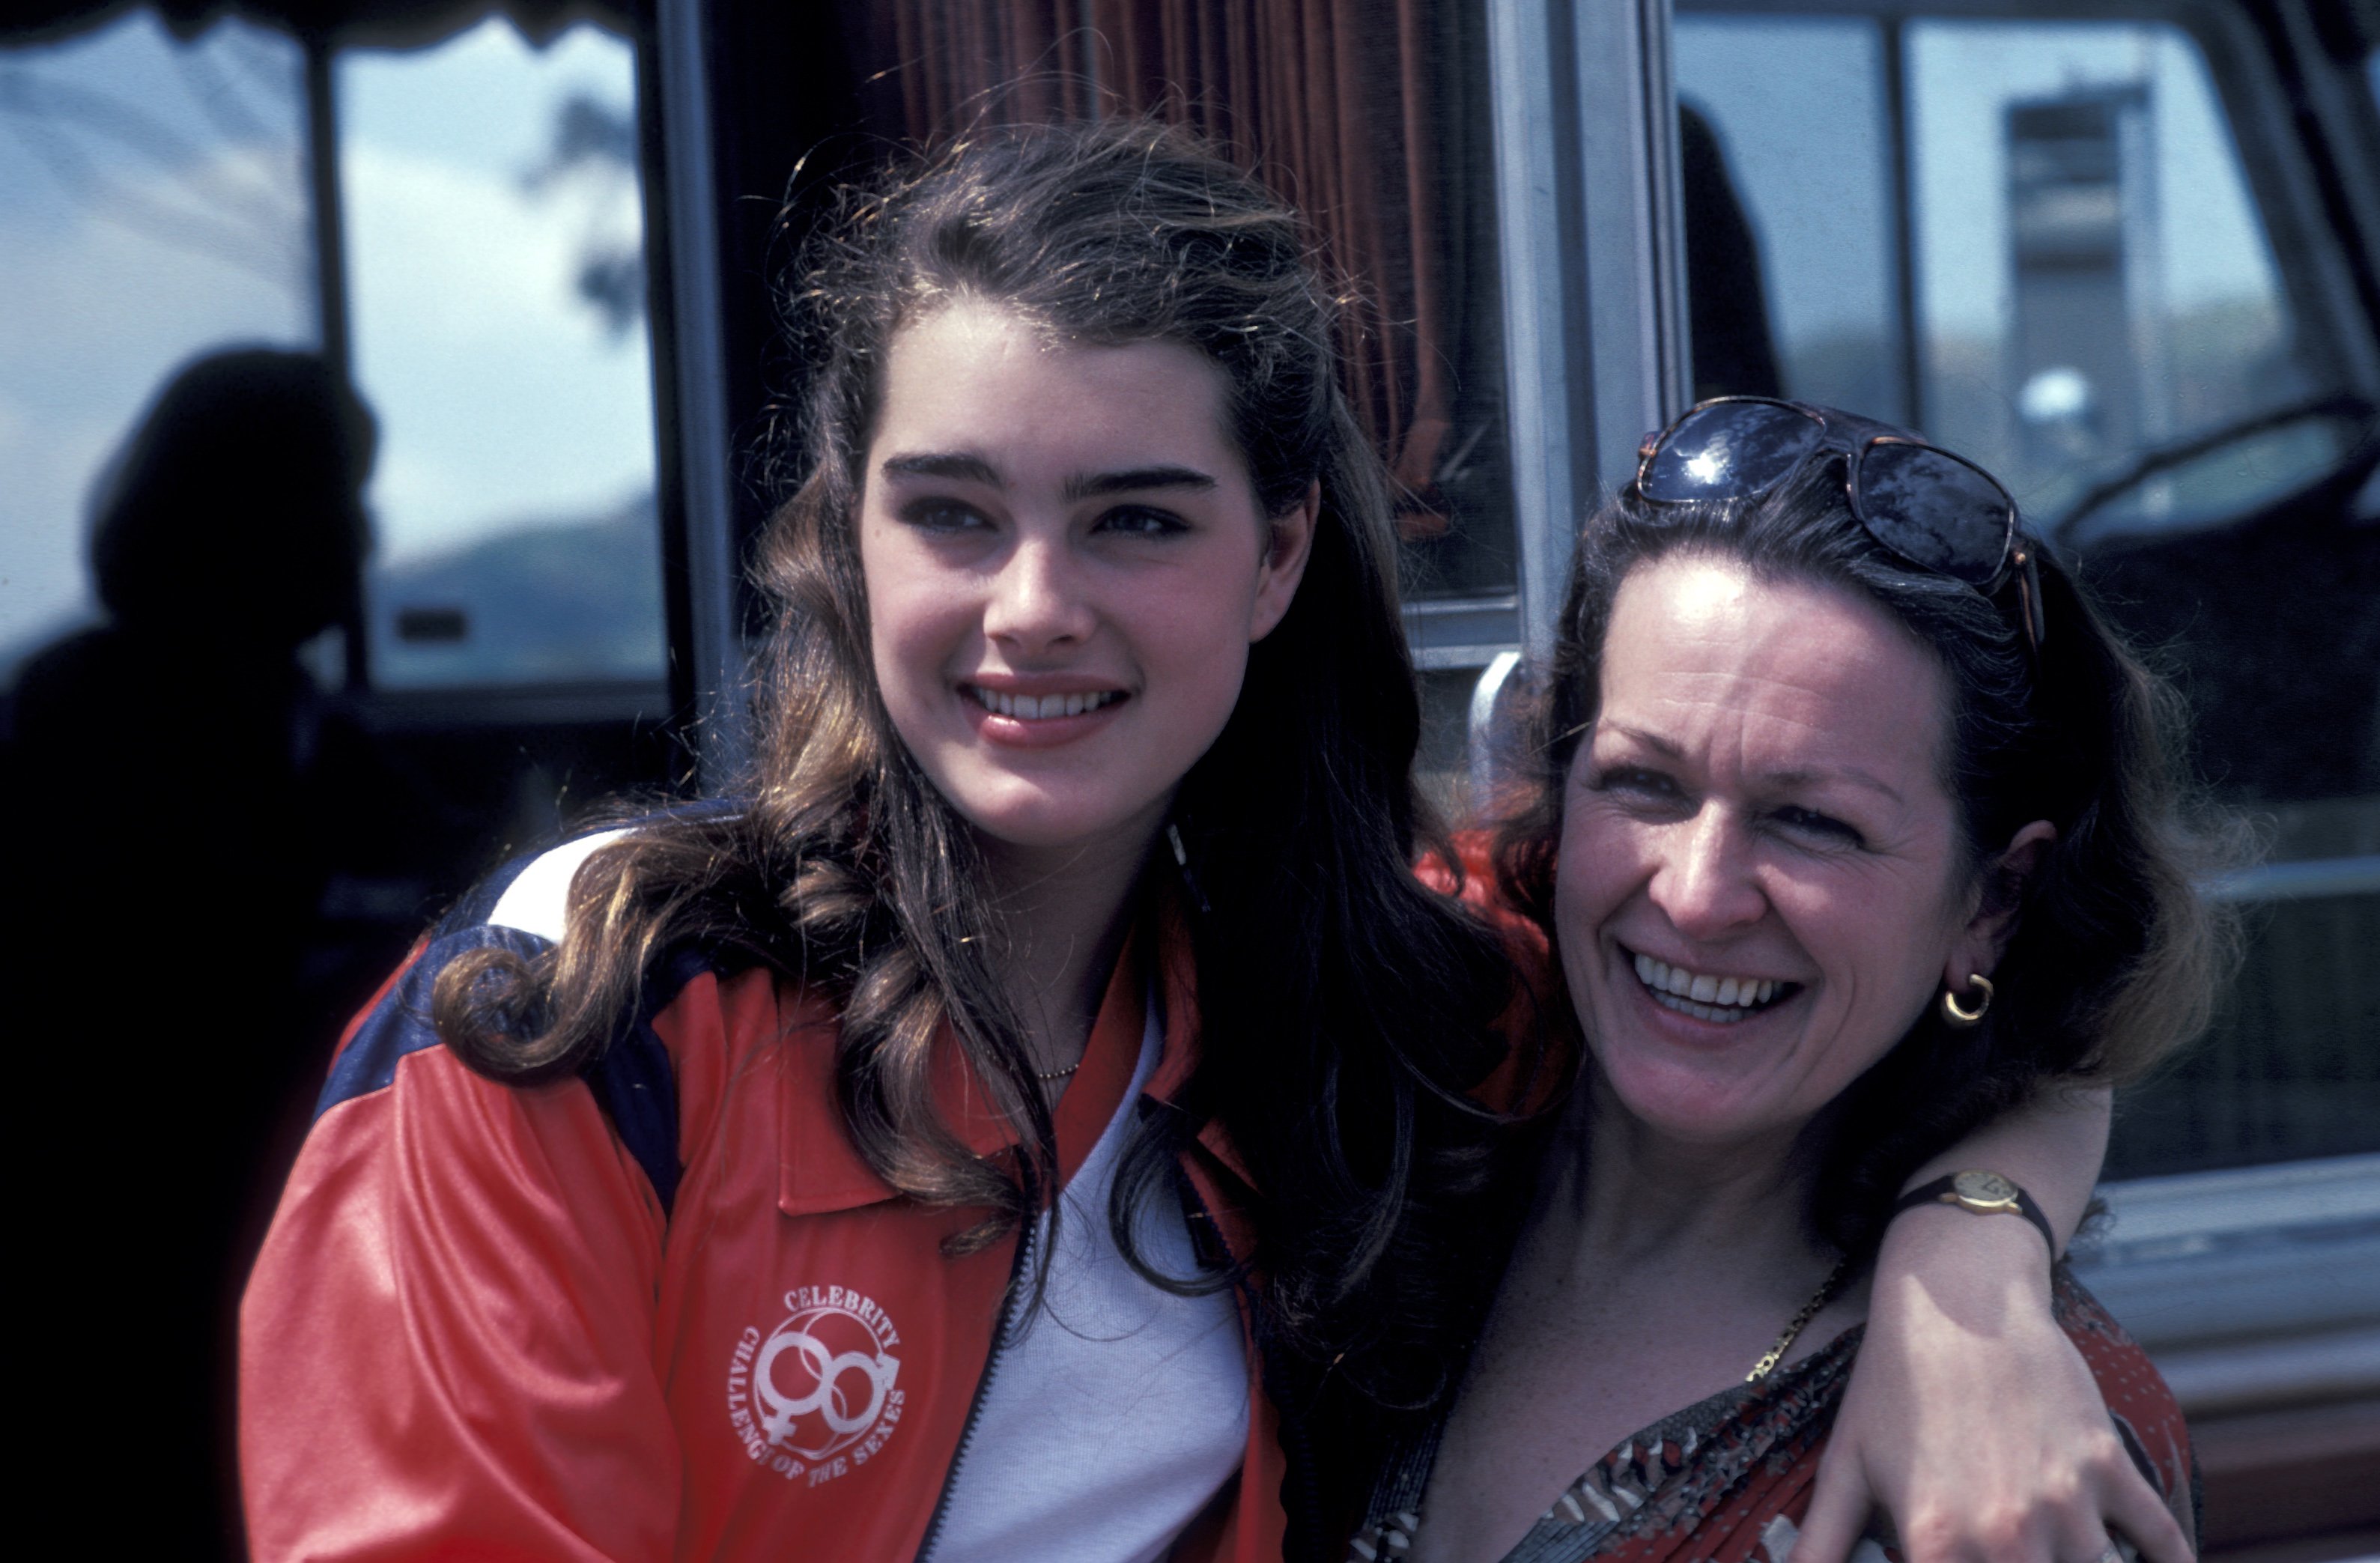 Brooke Shields and Terri Shields pictured at a taping of "Celebrity Challenge of the Sexes." / Source: Getty Images